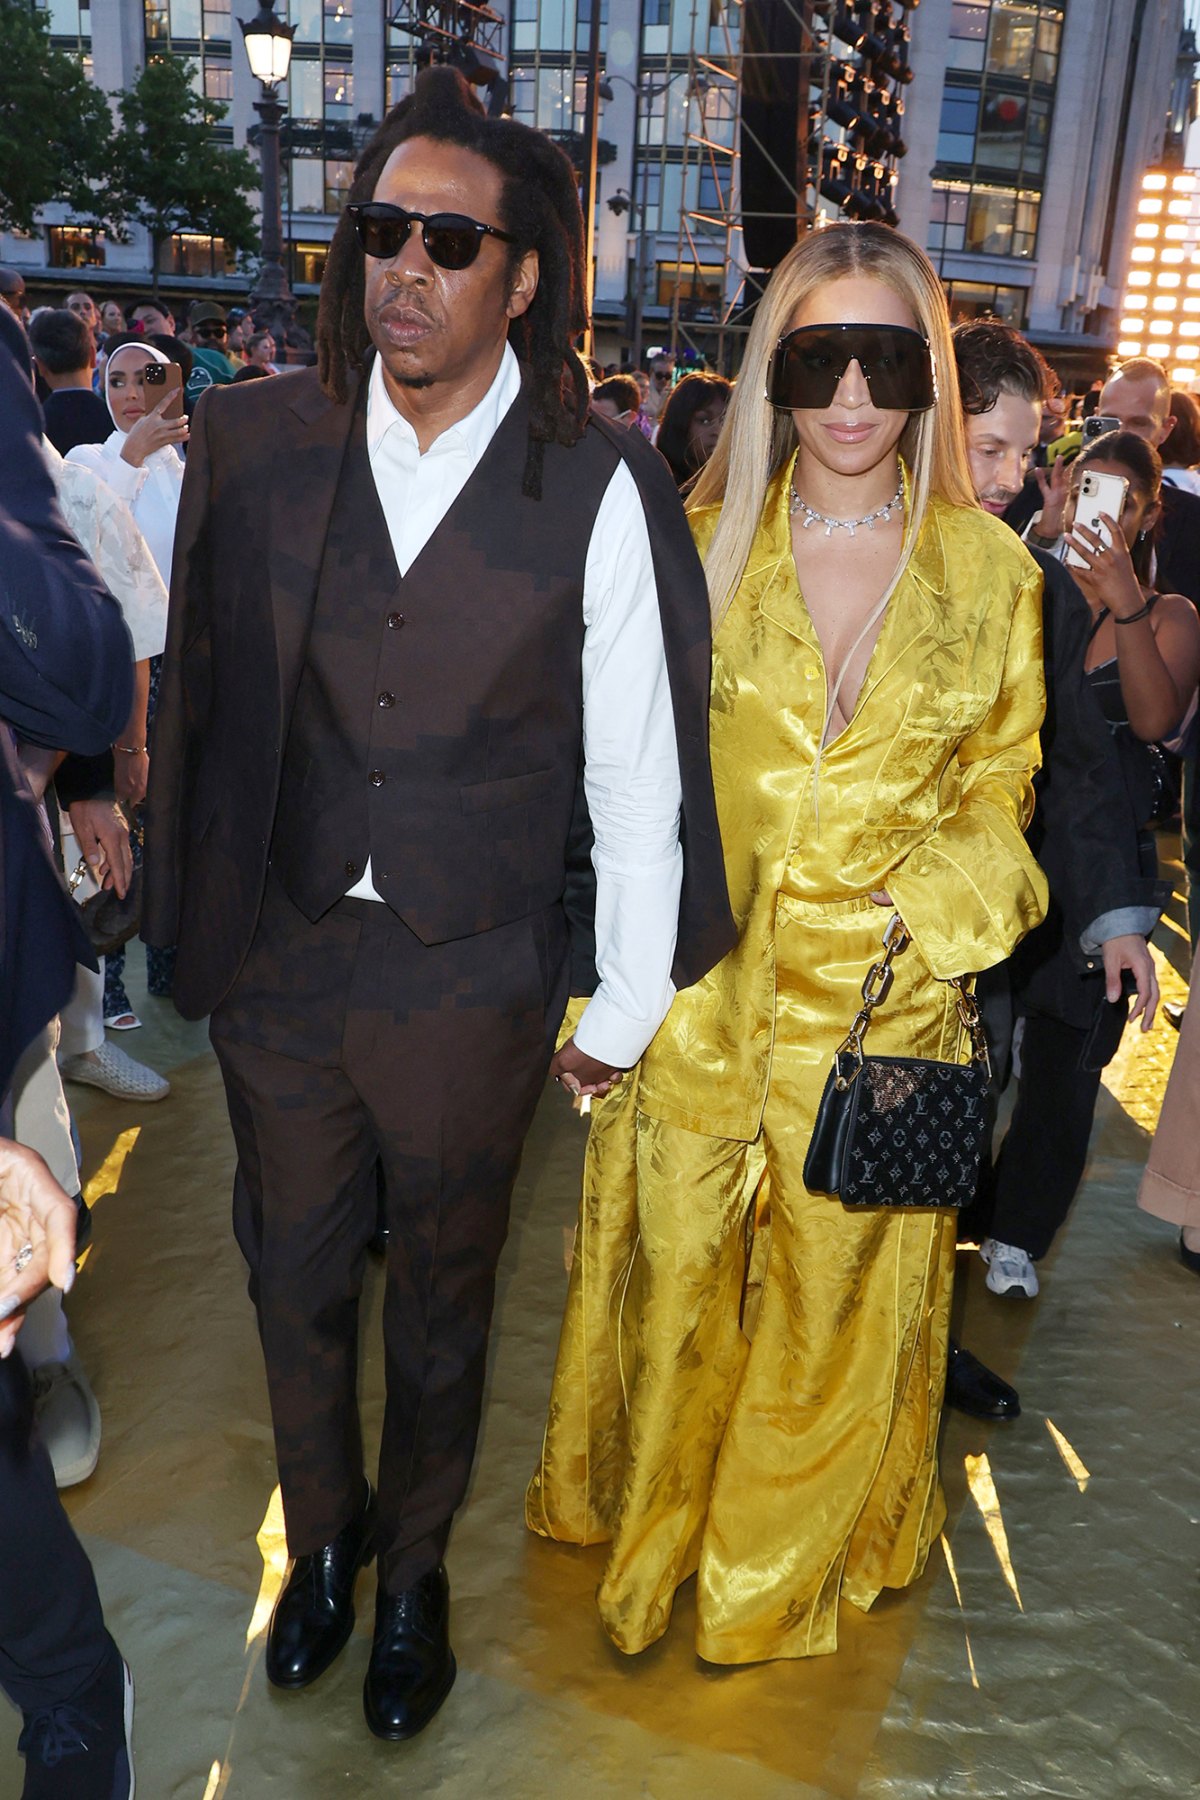 Louis Vuitton by Pharrell Williams: what to remember from the first show?